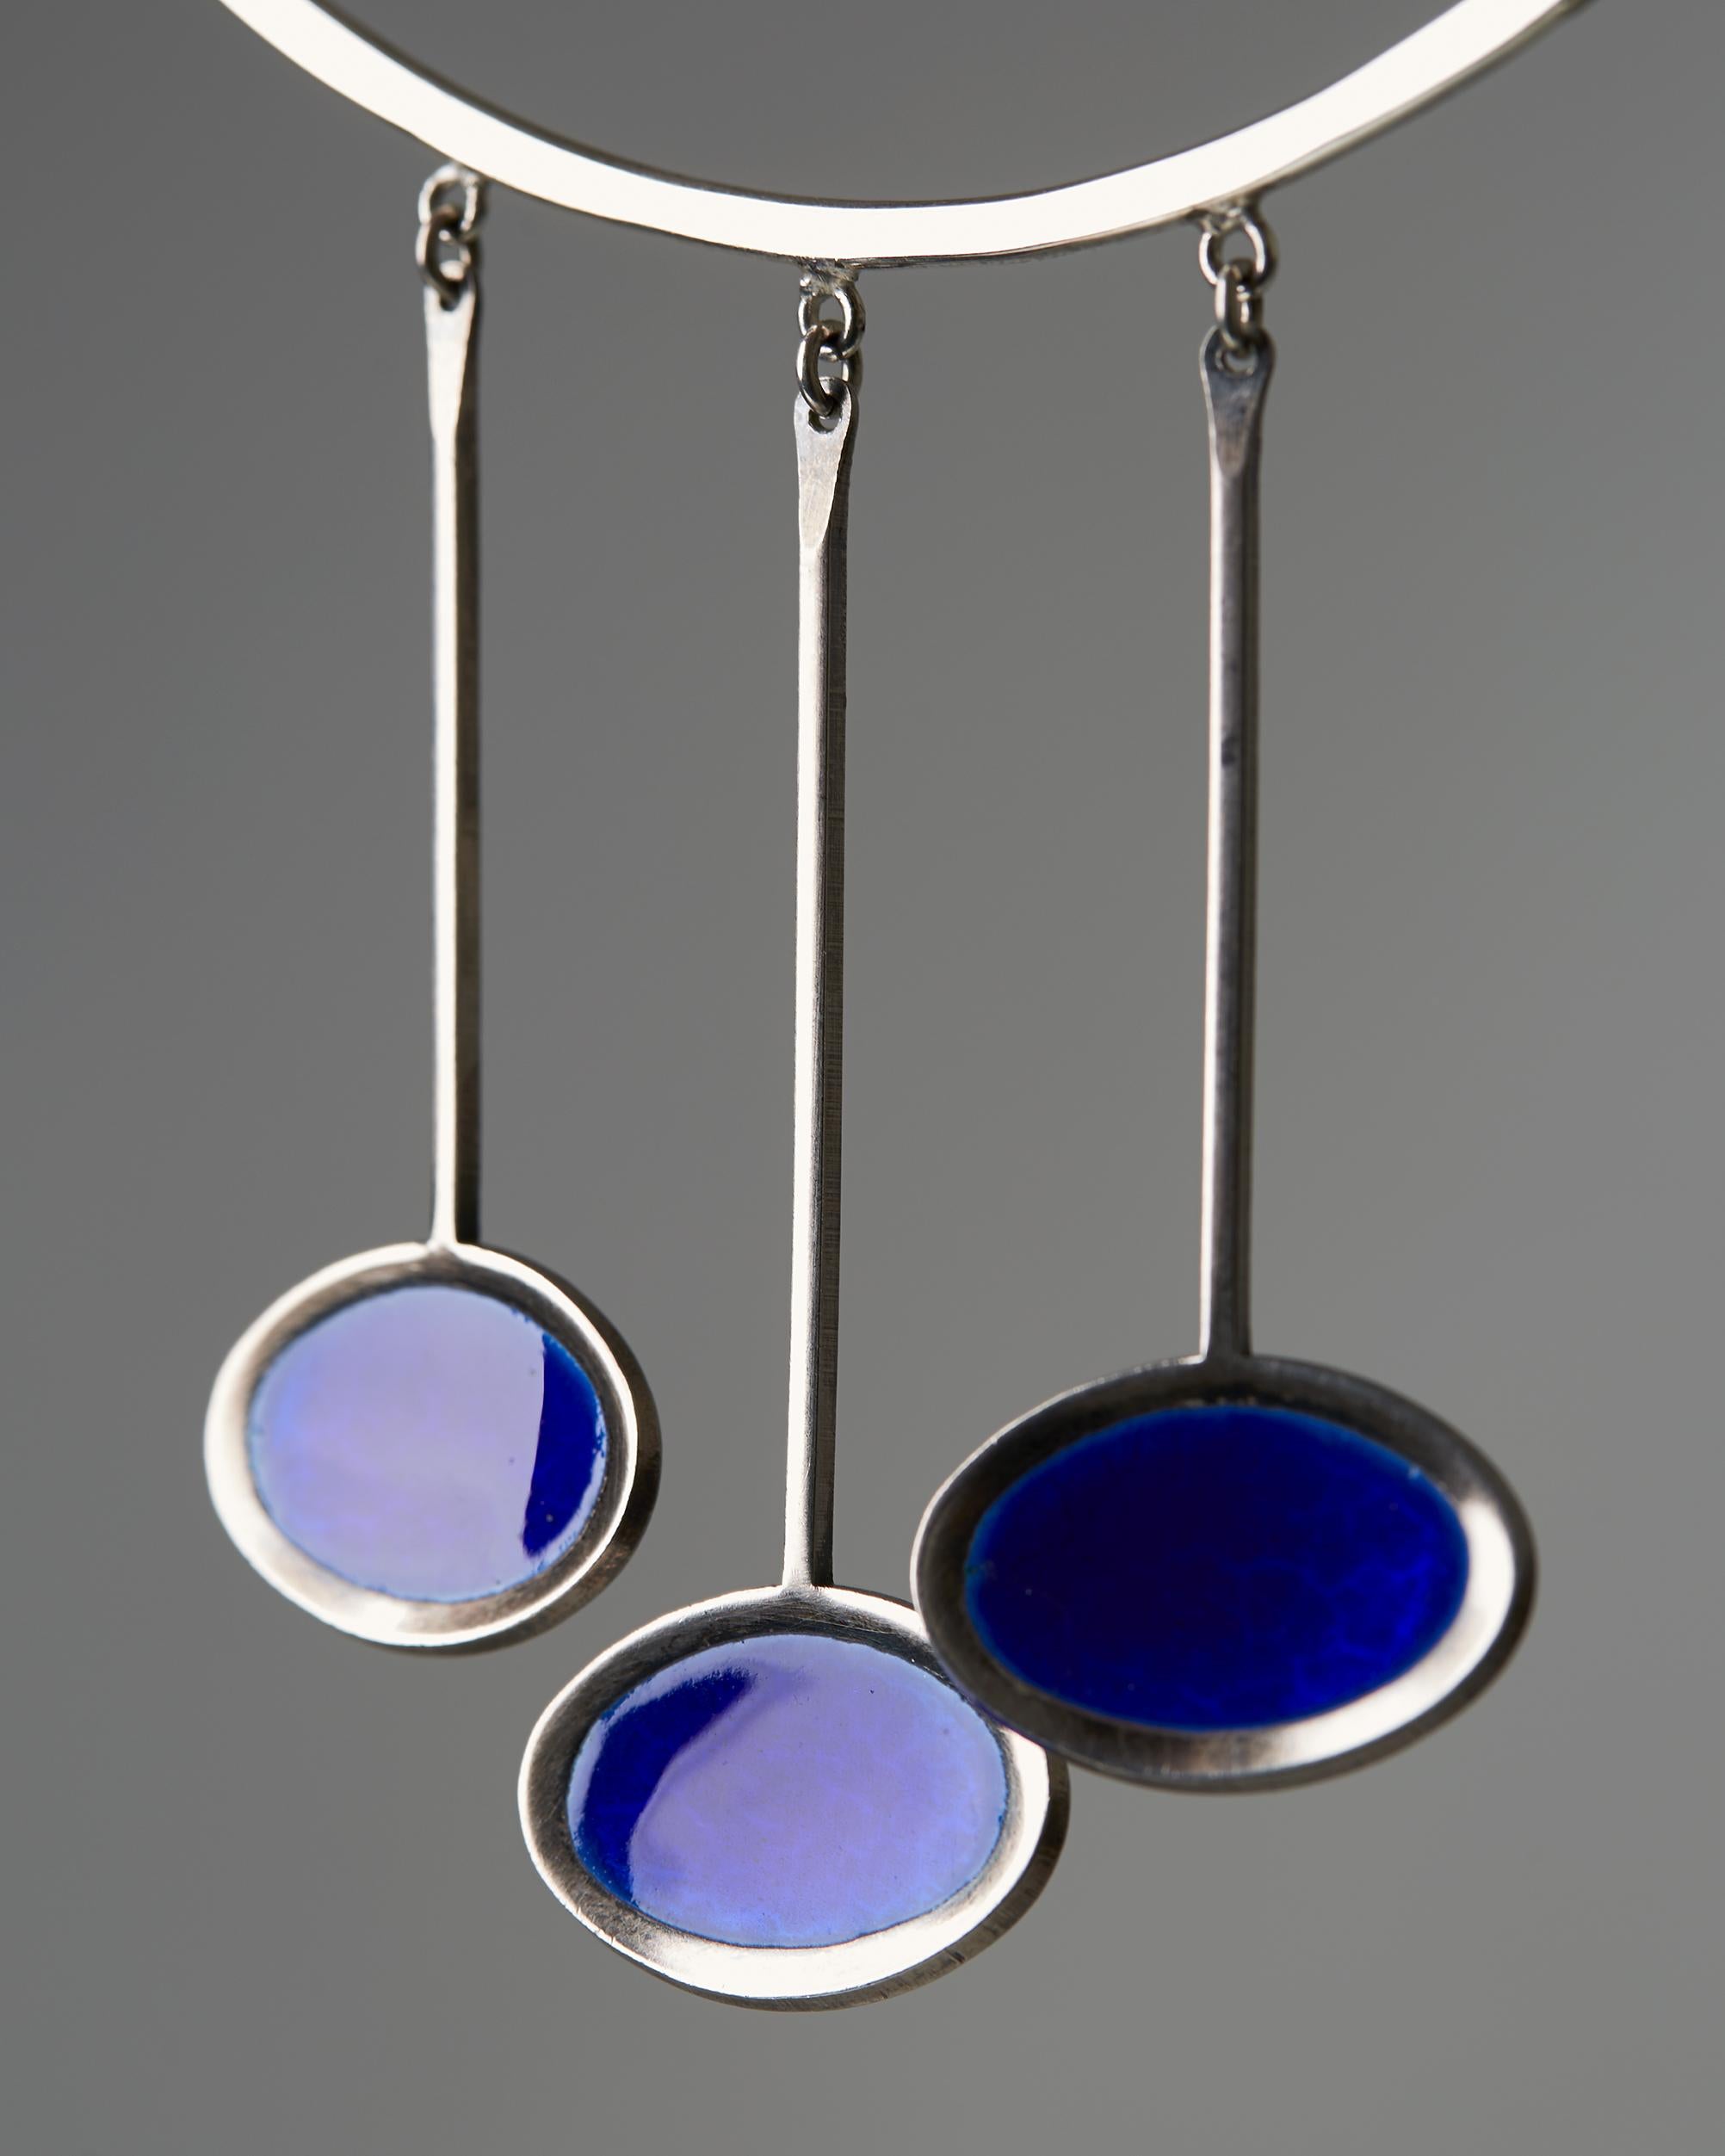 Necklace and Two Pairs of Earrings Designed by Gine Sommerfeldt for J. Tostrup For Sale 3